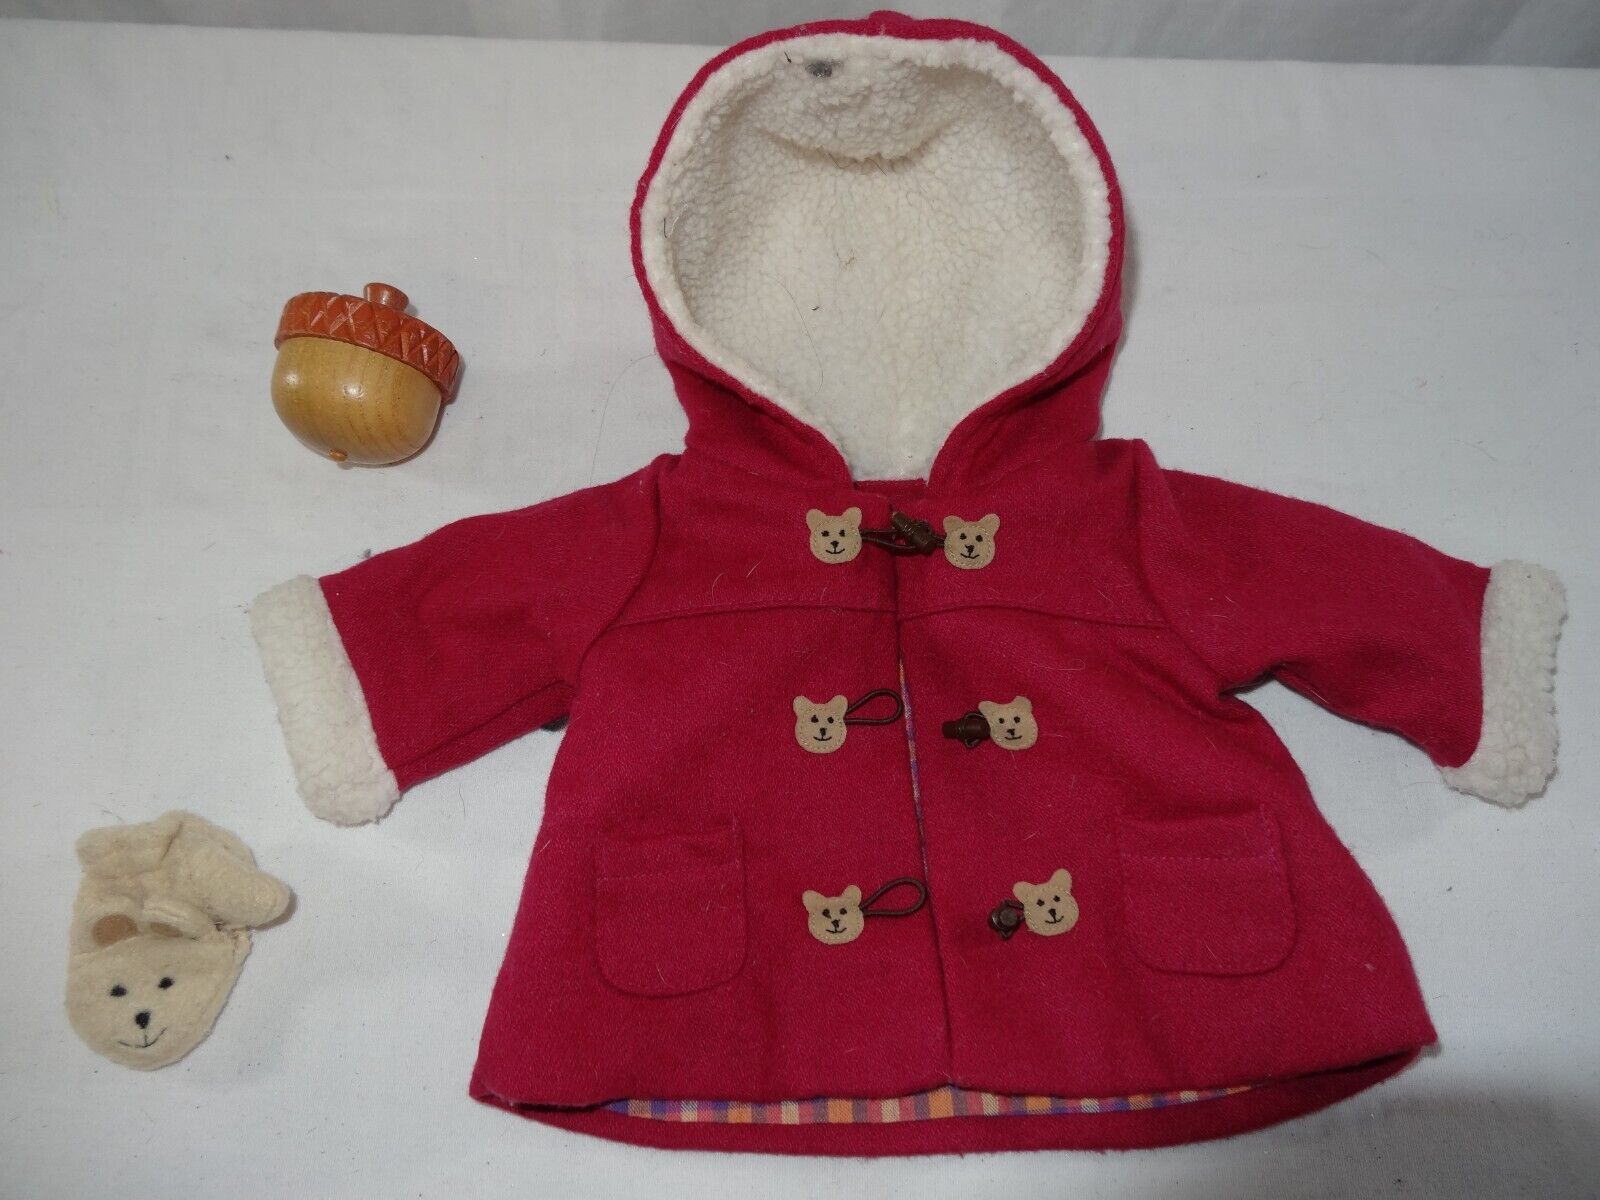 AMERICAN GIRL BITTY BABY 2003 TOGGLE COAT Acorn Spin Toy + 1 Mitten - $30.70